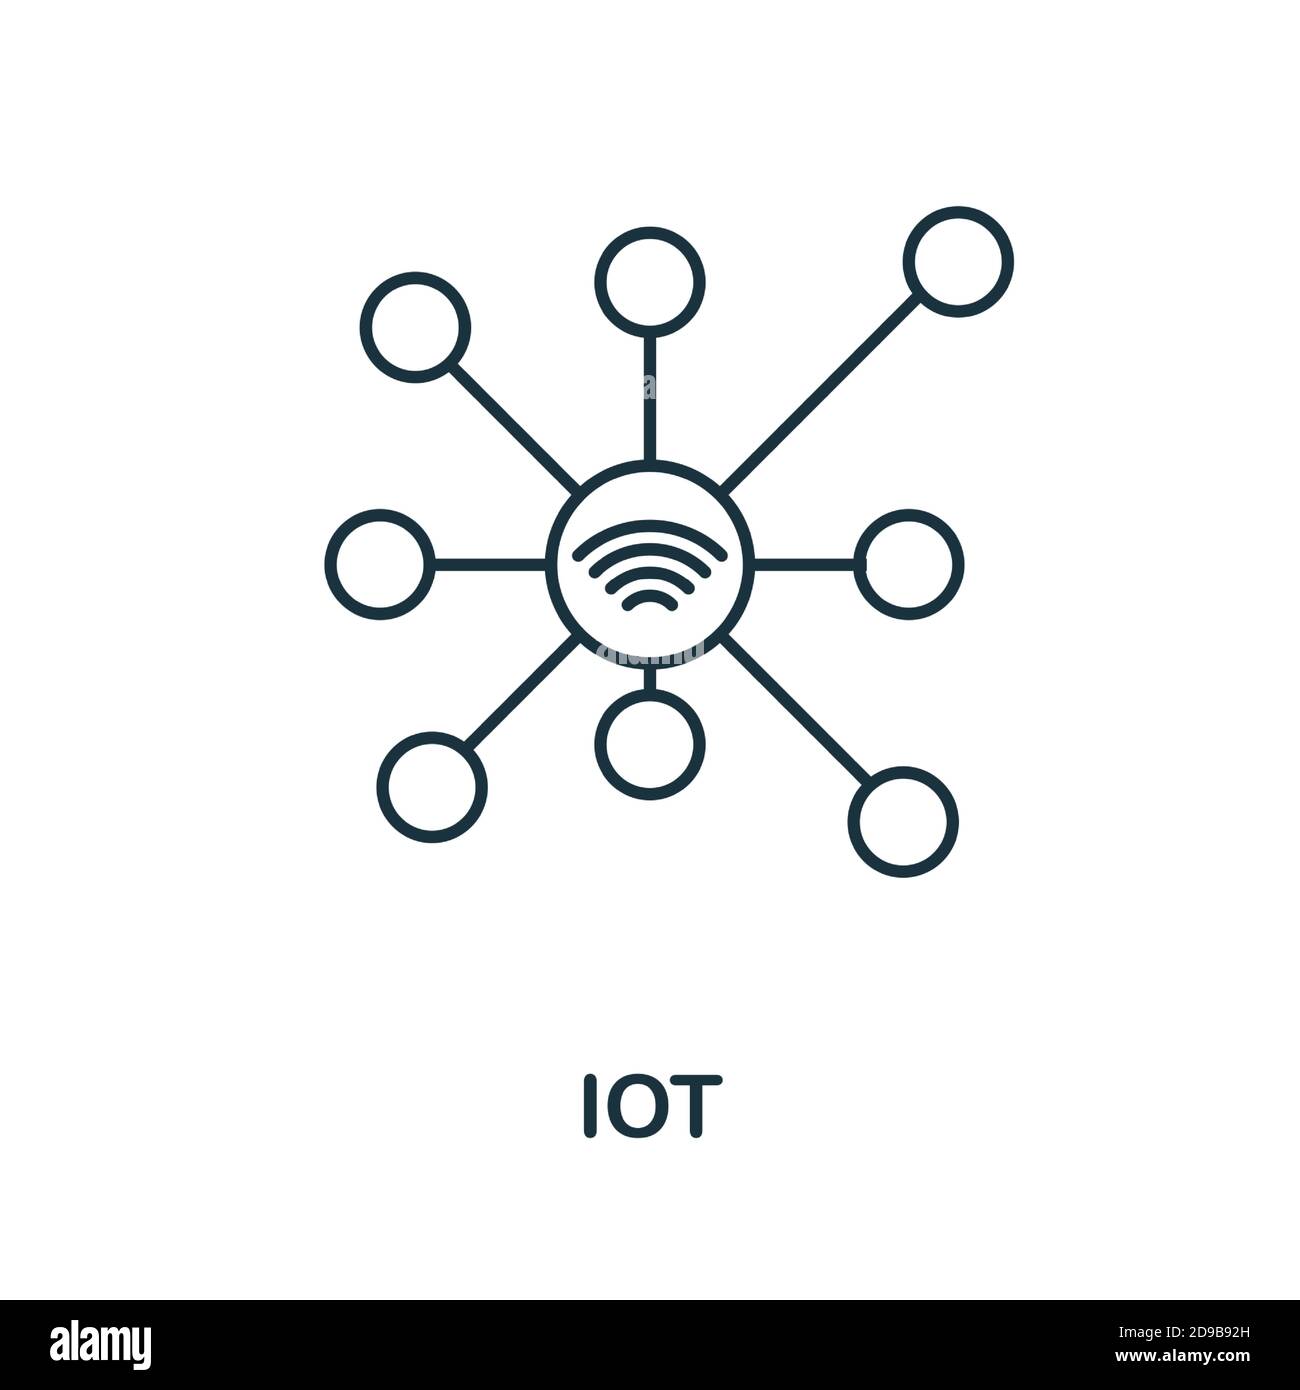 Iot line icon. Simple element from digital disruption collection. Outline Iot icon element Stock Vector